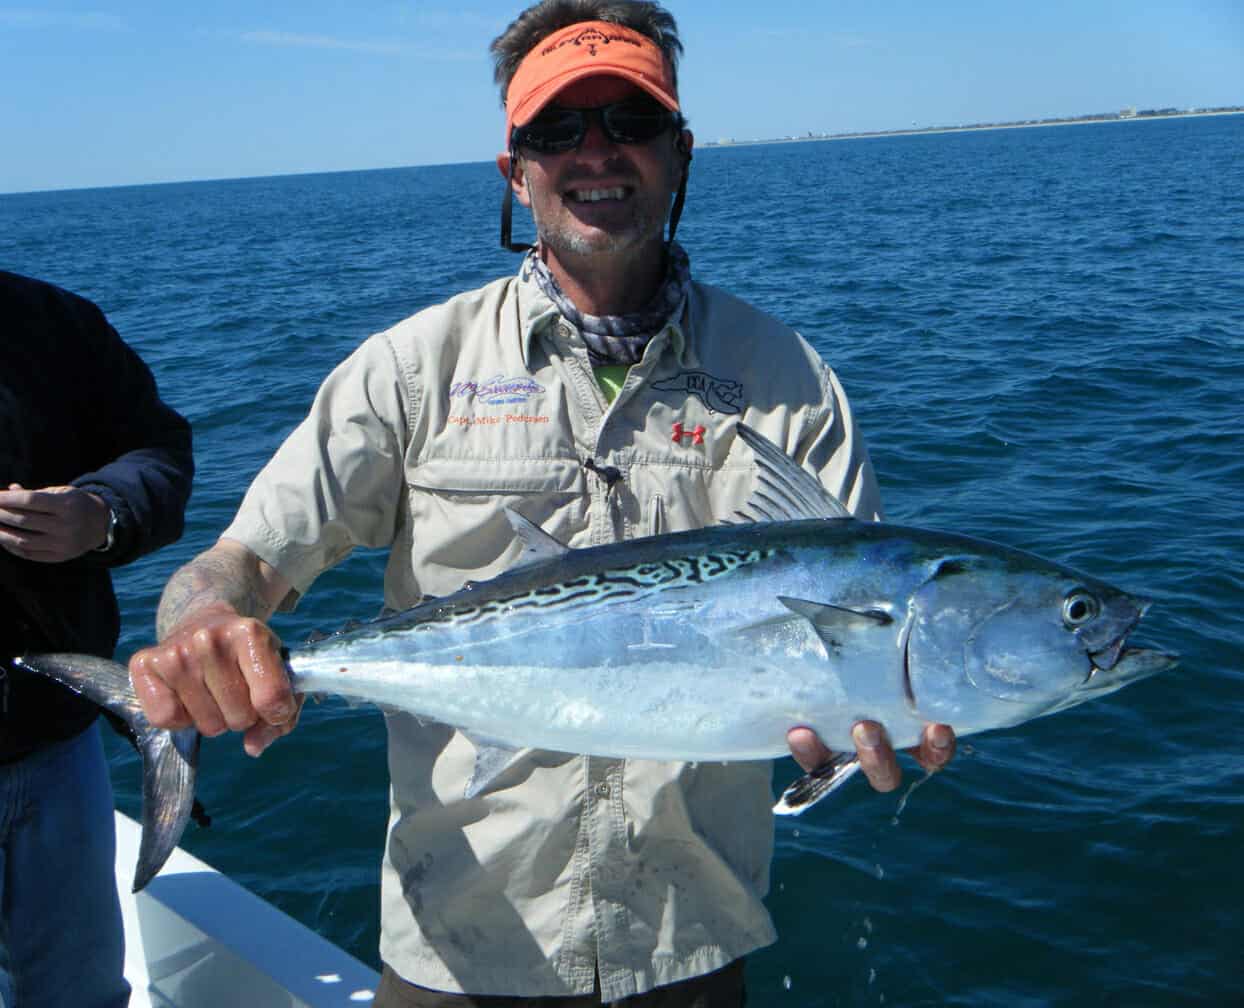 Capt Mike Fishing - NX Fishing Charters - Riley Rods - Team North Fork Composites 17